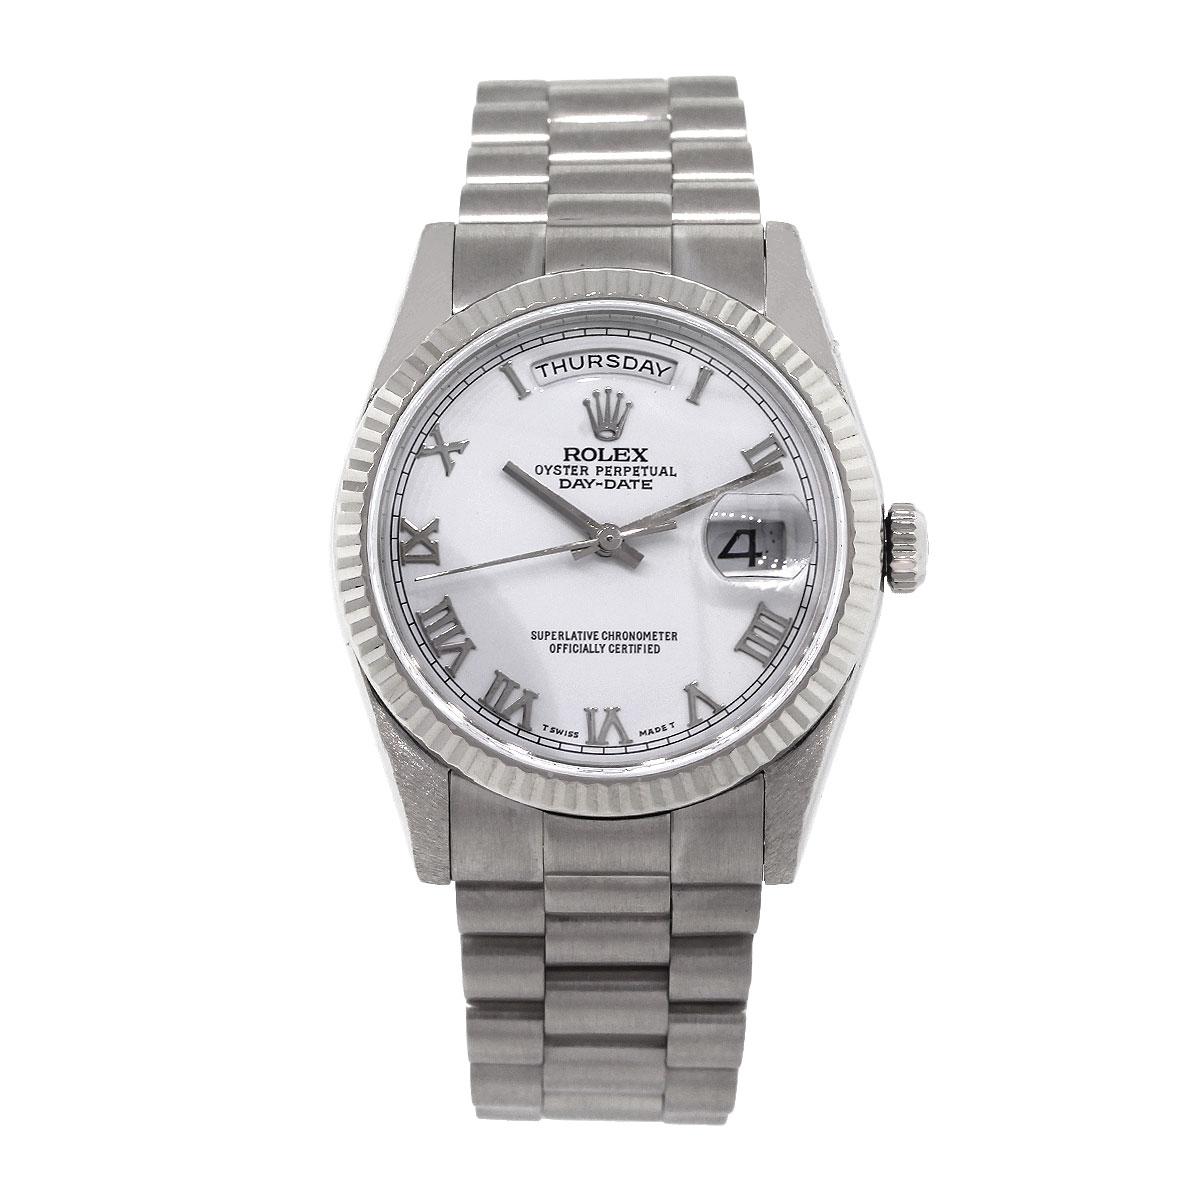 Brand: Rolex
MPN: 118239
Model: Day Date
Case Material: 18k White Gold
Case Diameter: 36mm
Crystal: Scratch resistant sapphire
Bezel: 18k White Gold Fluted Bezel
Dial: White dial with silver roman numerals. Date window at the 3 o’clock position. Day